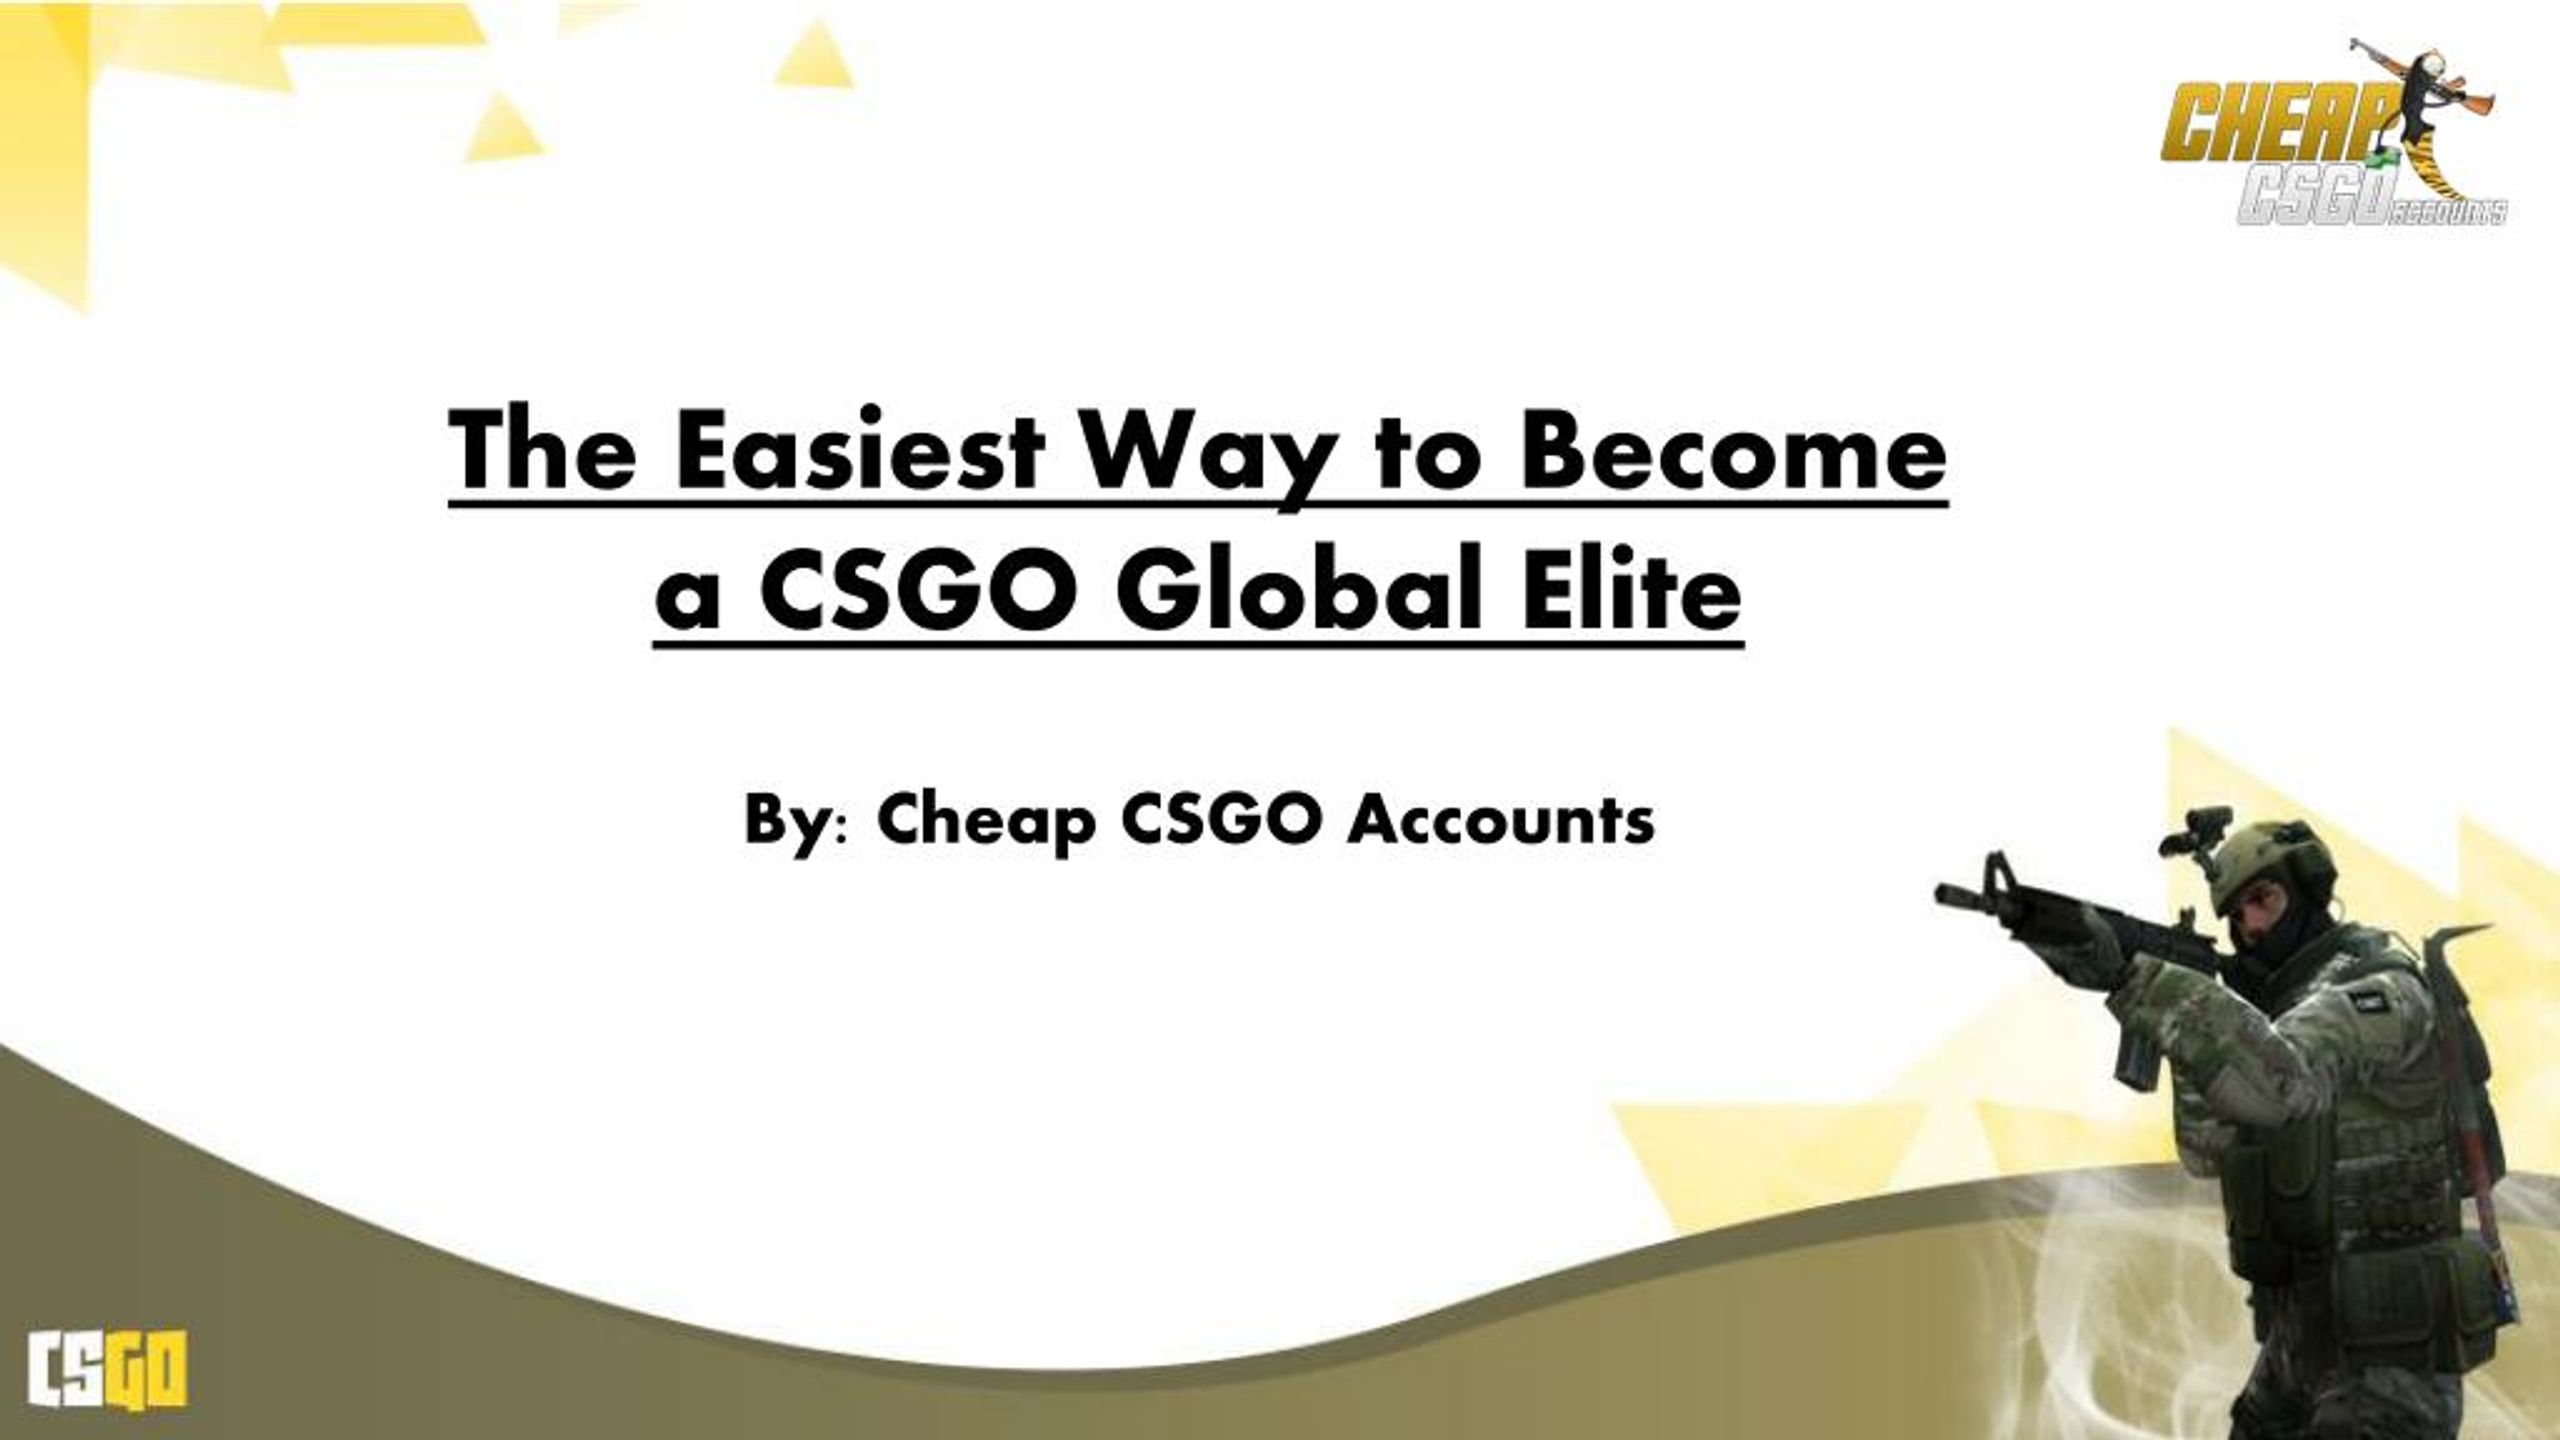 Ppt How To Become A Csgo Global Elite Easily Powerpoint Presentation Id